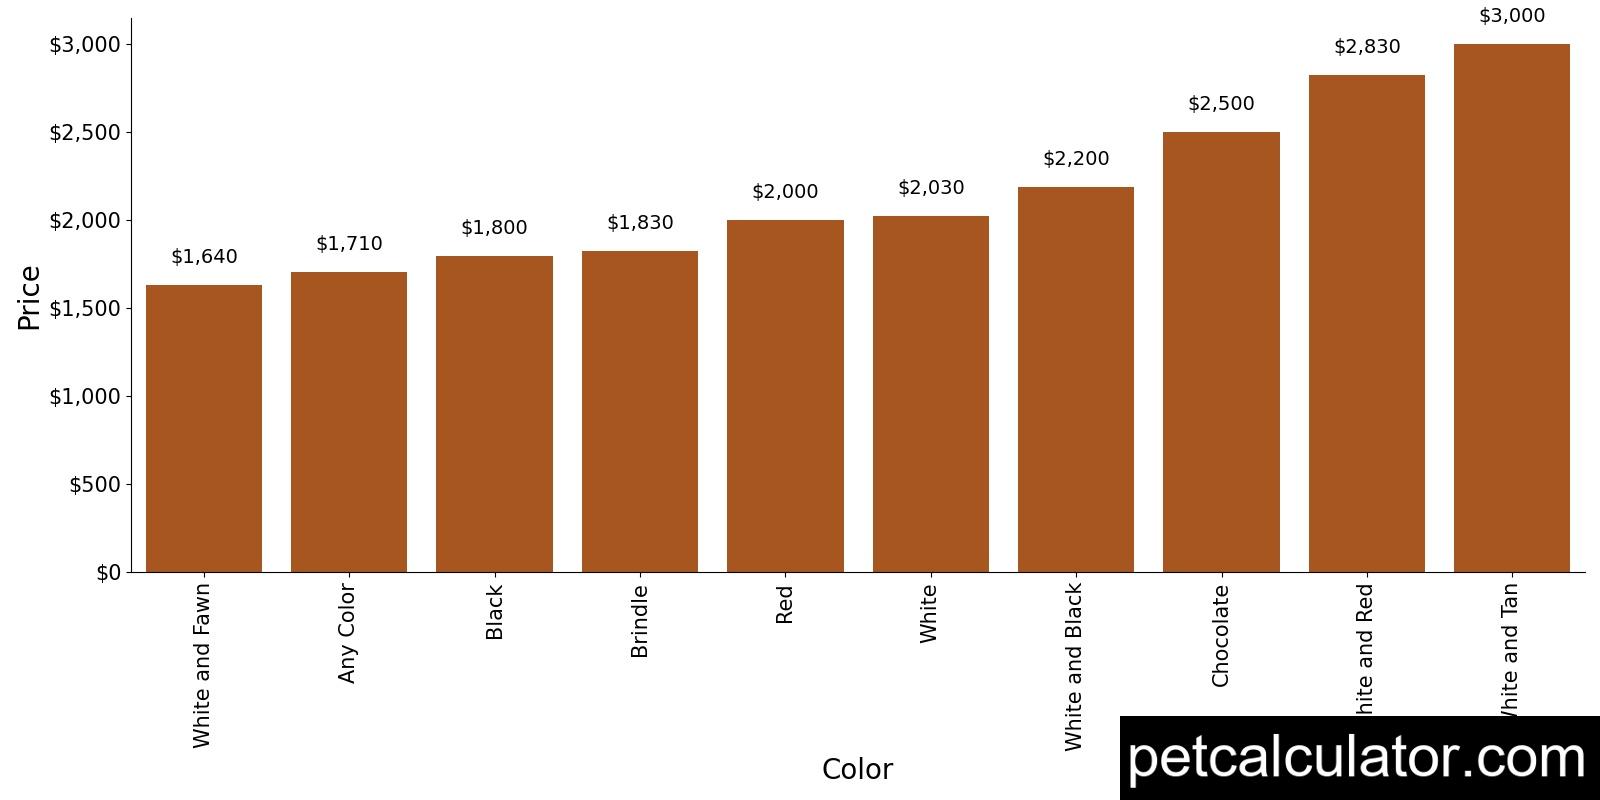 Price of Bull Terrier by Color 